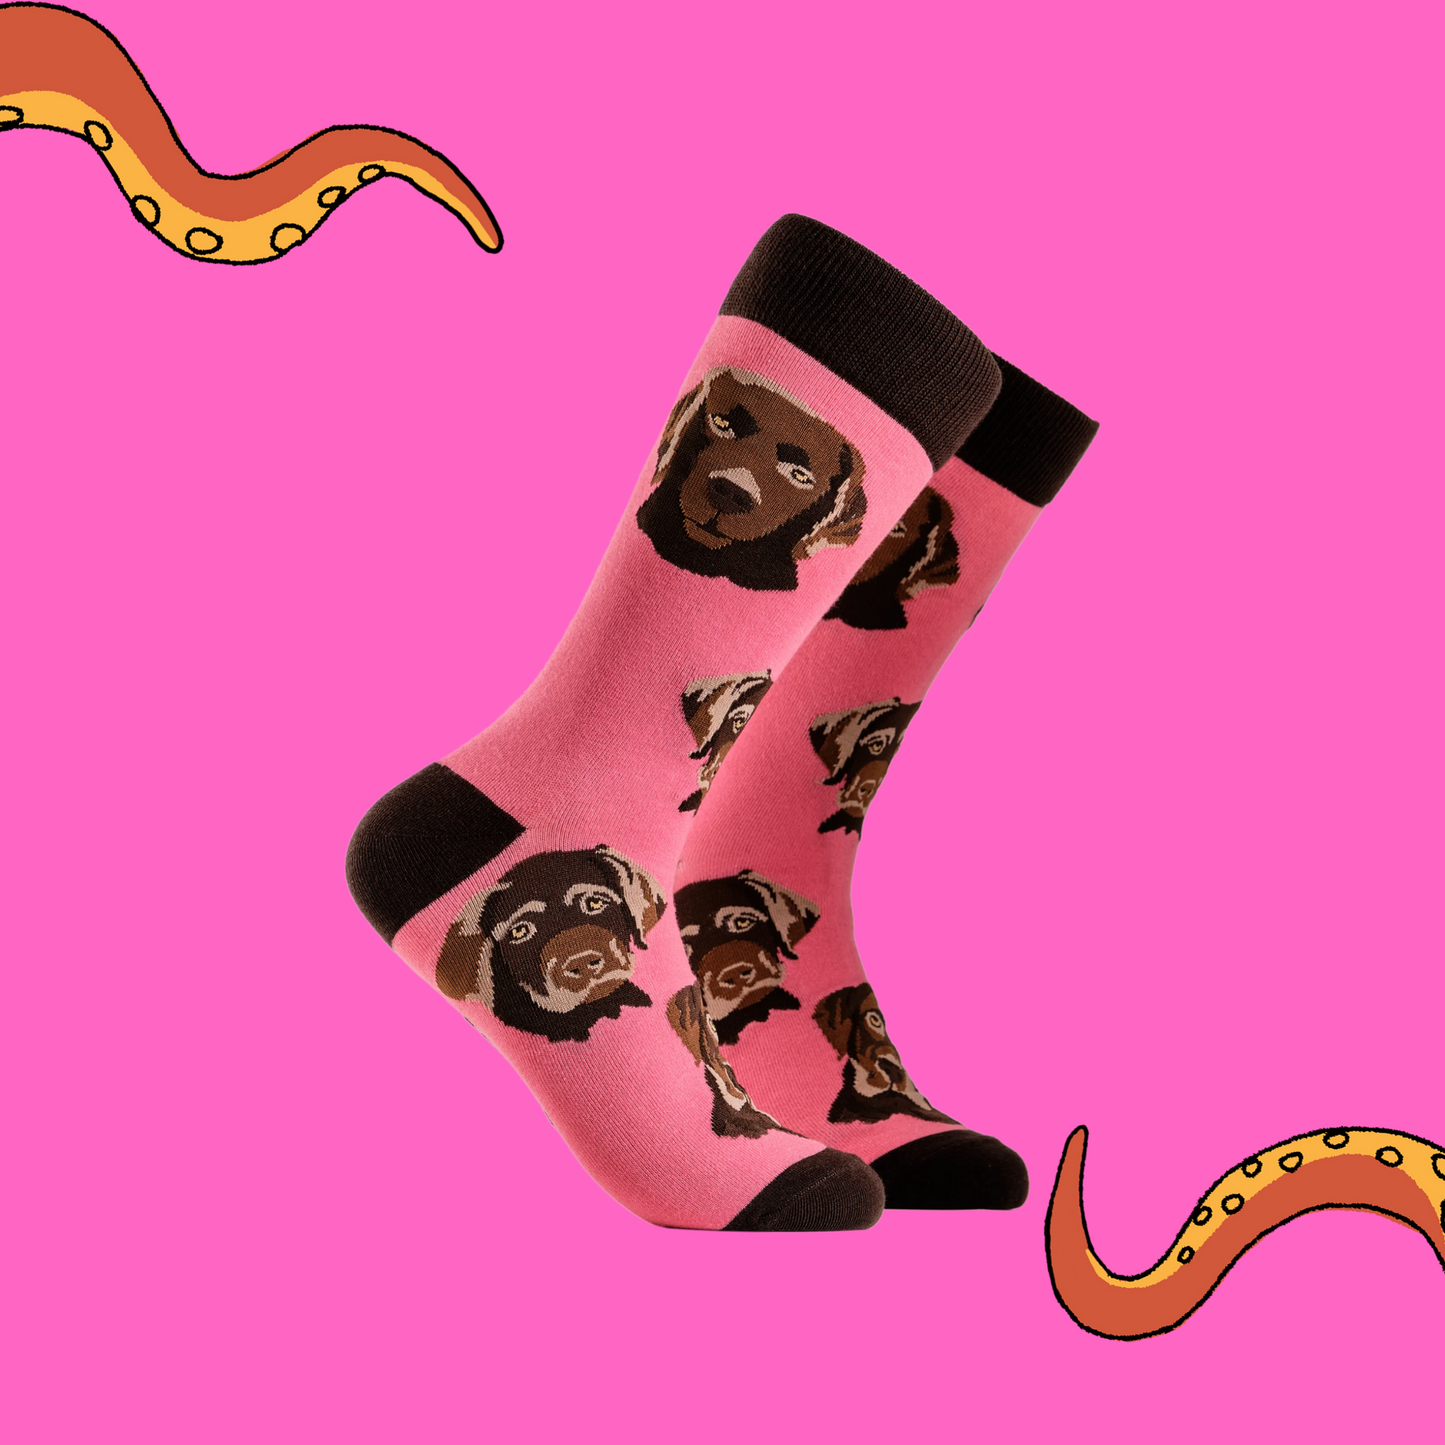 A pair of socks depicting chocolate Labradors. Pink legs, brown cuff, heel and toe.